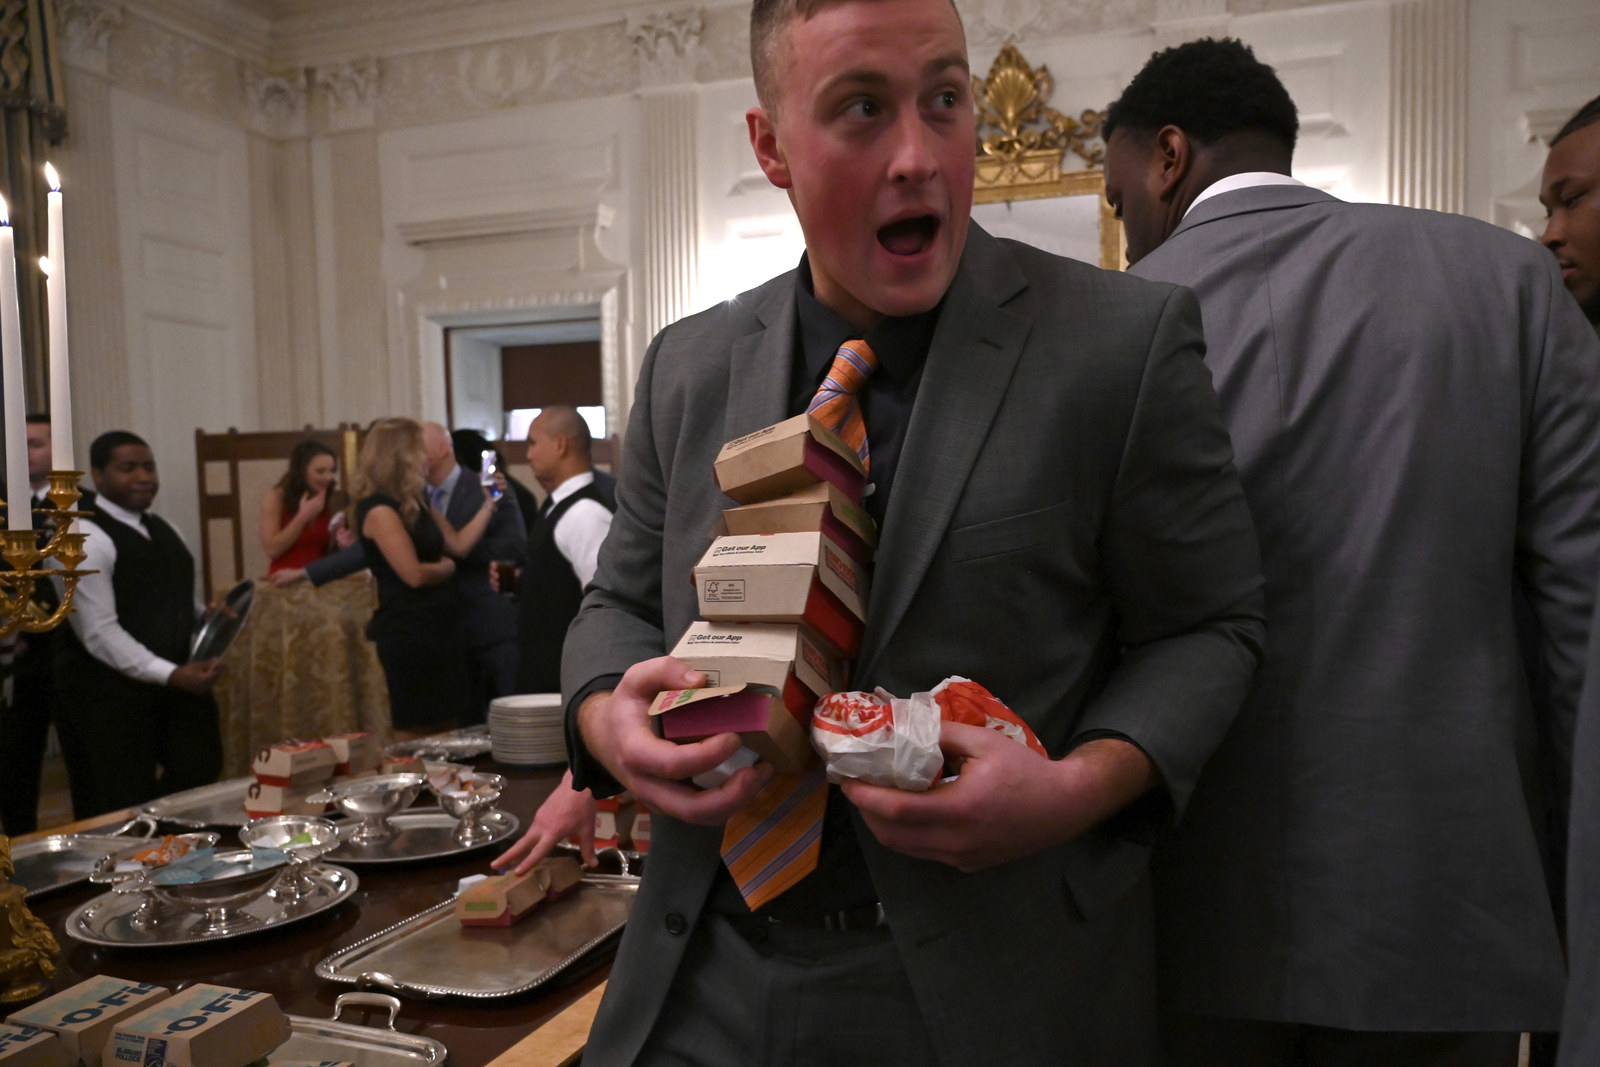 The Pure American Banality of Donald Trump's White House Fast-Food Buffet